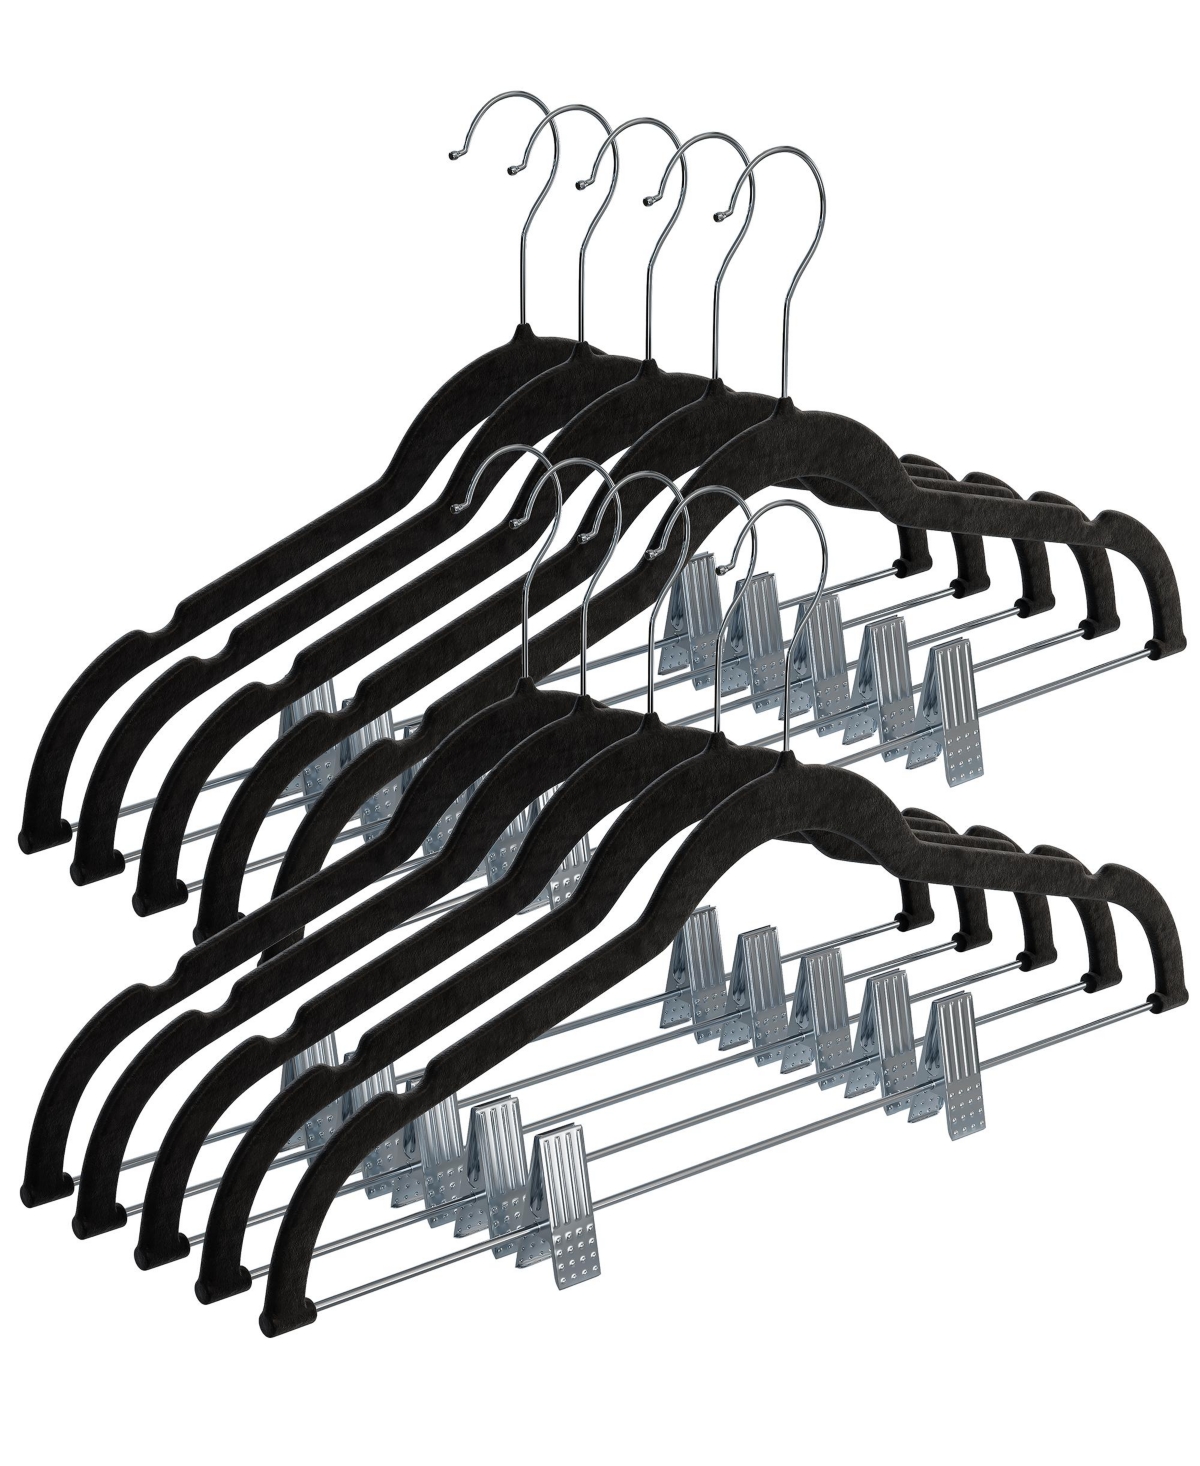 10 Pack Clothes Hangers with Clips - Black Velvet Hangers use for Skirt Hangers - Clothes Hanger for Pants Ultra Thin No Slip Hangers - Black